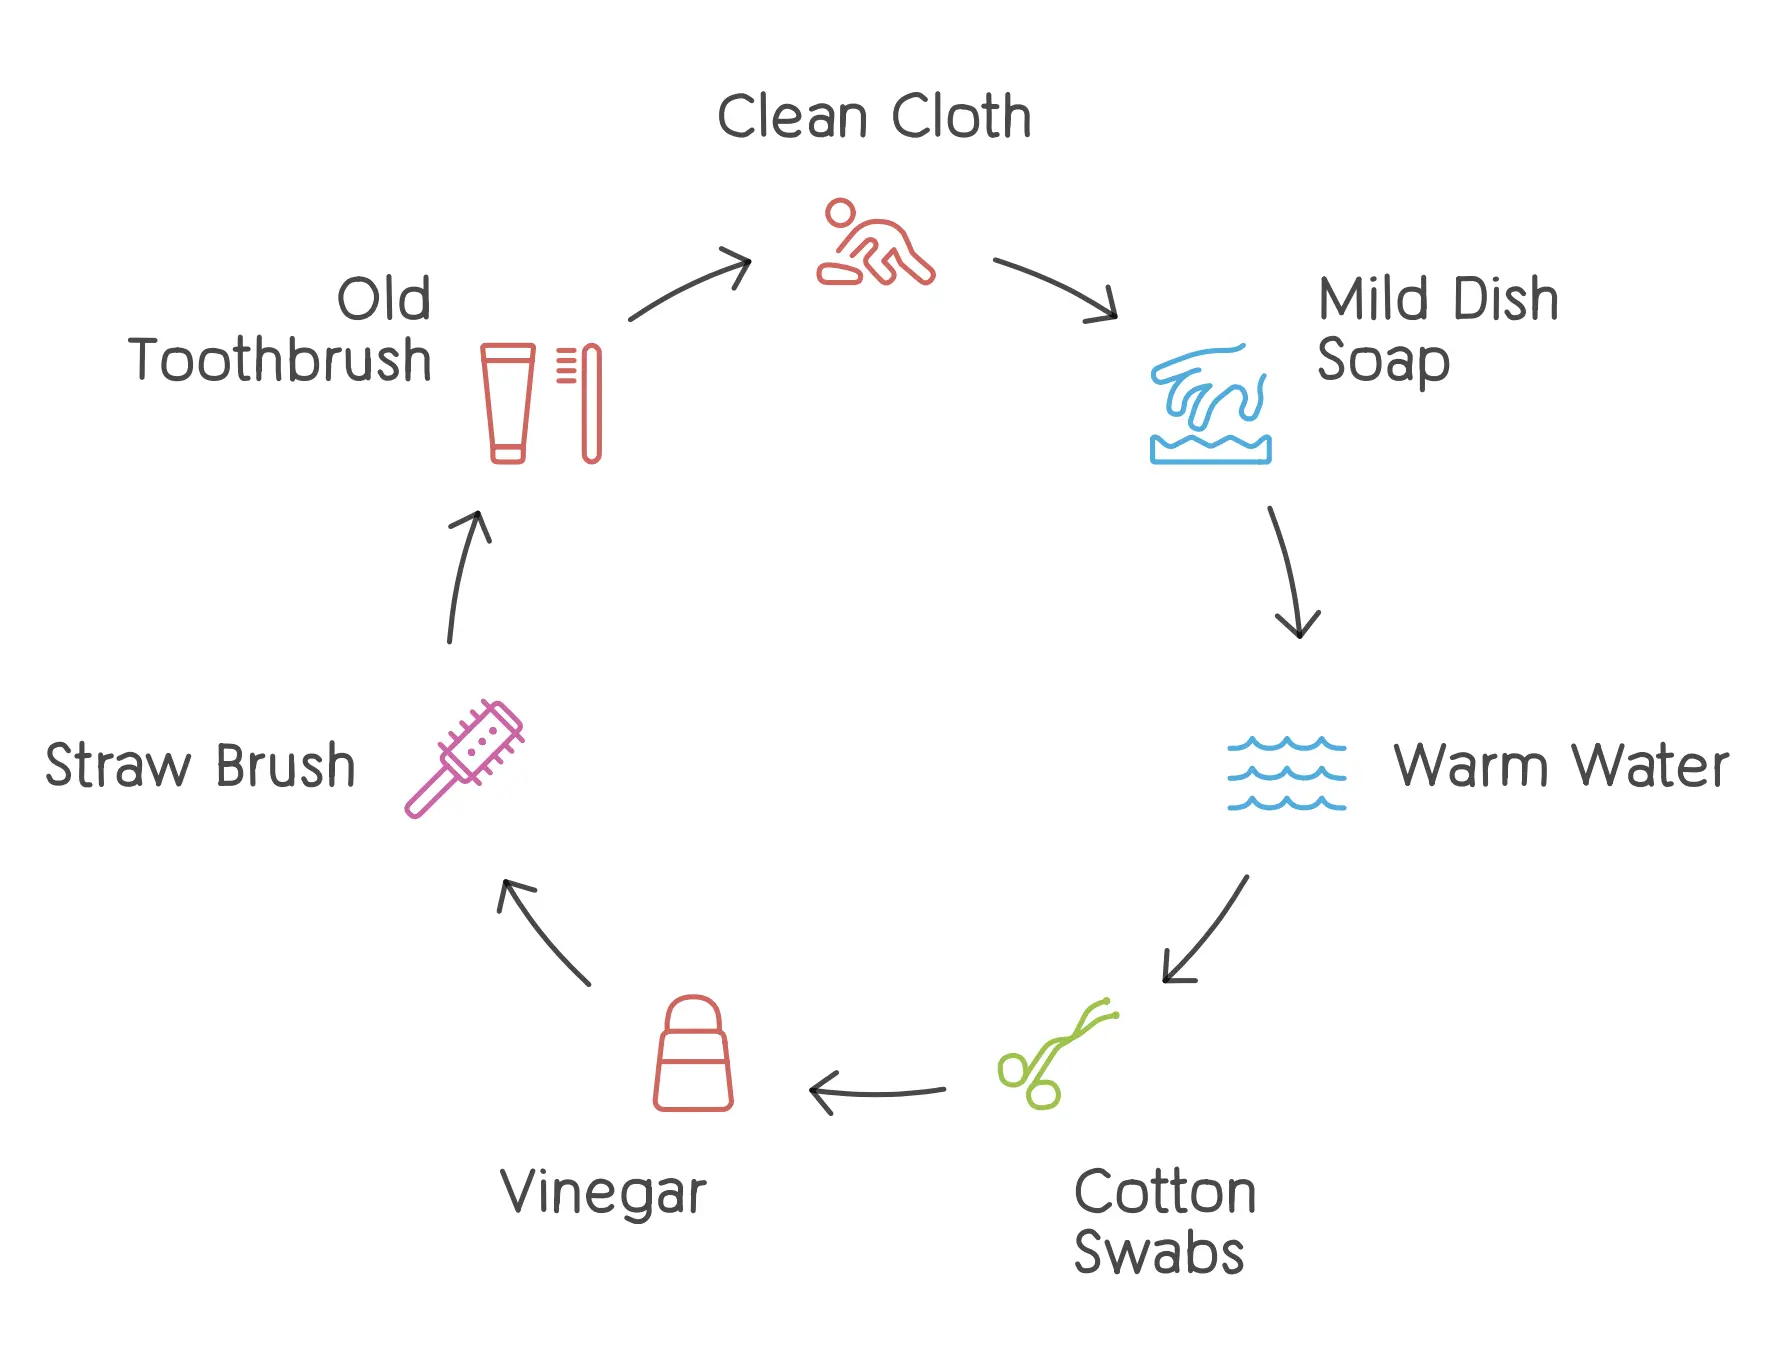 A circular diagram showing how to clean a cloth. The diagram includes icons for a toothbrush, toothpaste, soap, straw brush, vinegar, cotton swabs, and mild dish soap.